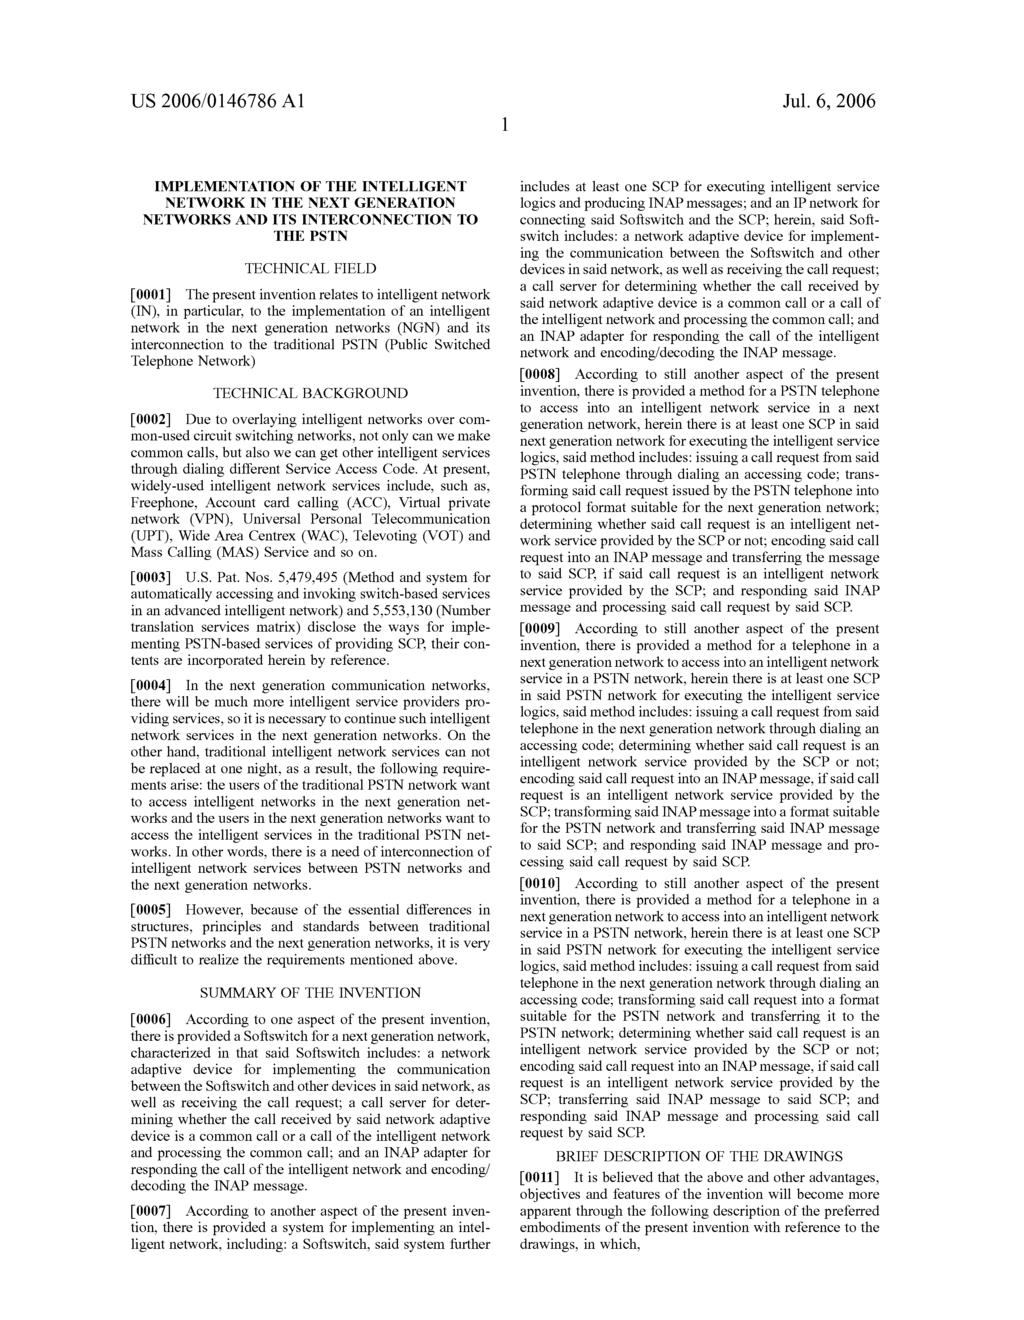 US 2006/0146786 A1 Jul. 6, 2006 IMPLEMENTATION OF THE INTELLIGENT NETWORK IN THE NEXT GENERATION NETWORKS AND ITS INTERCONNECTION TO THE PSTN TECHNICAL FIELD 0001.